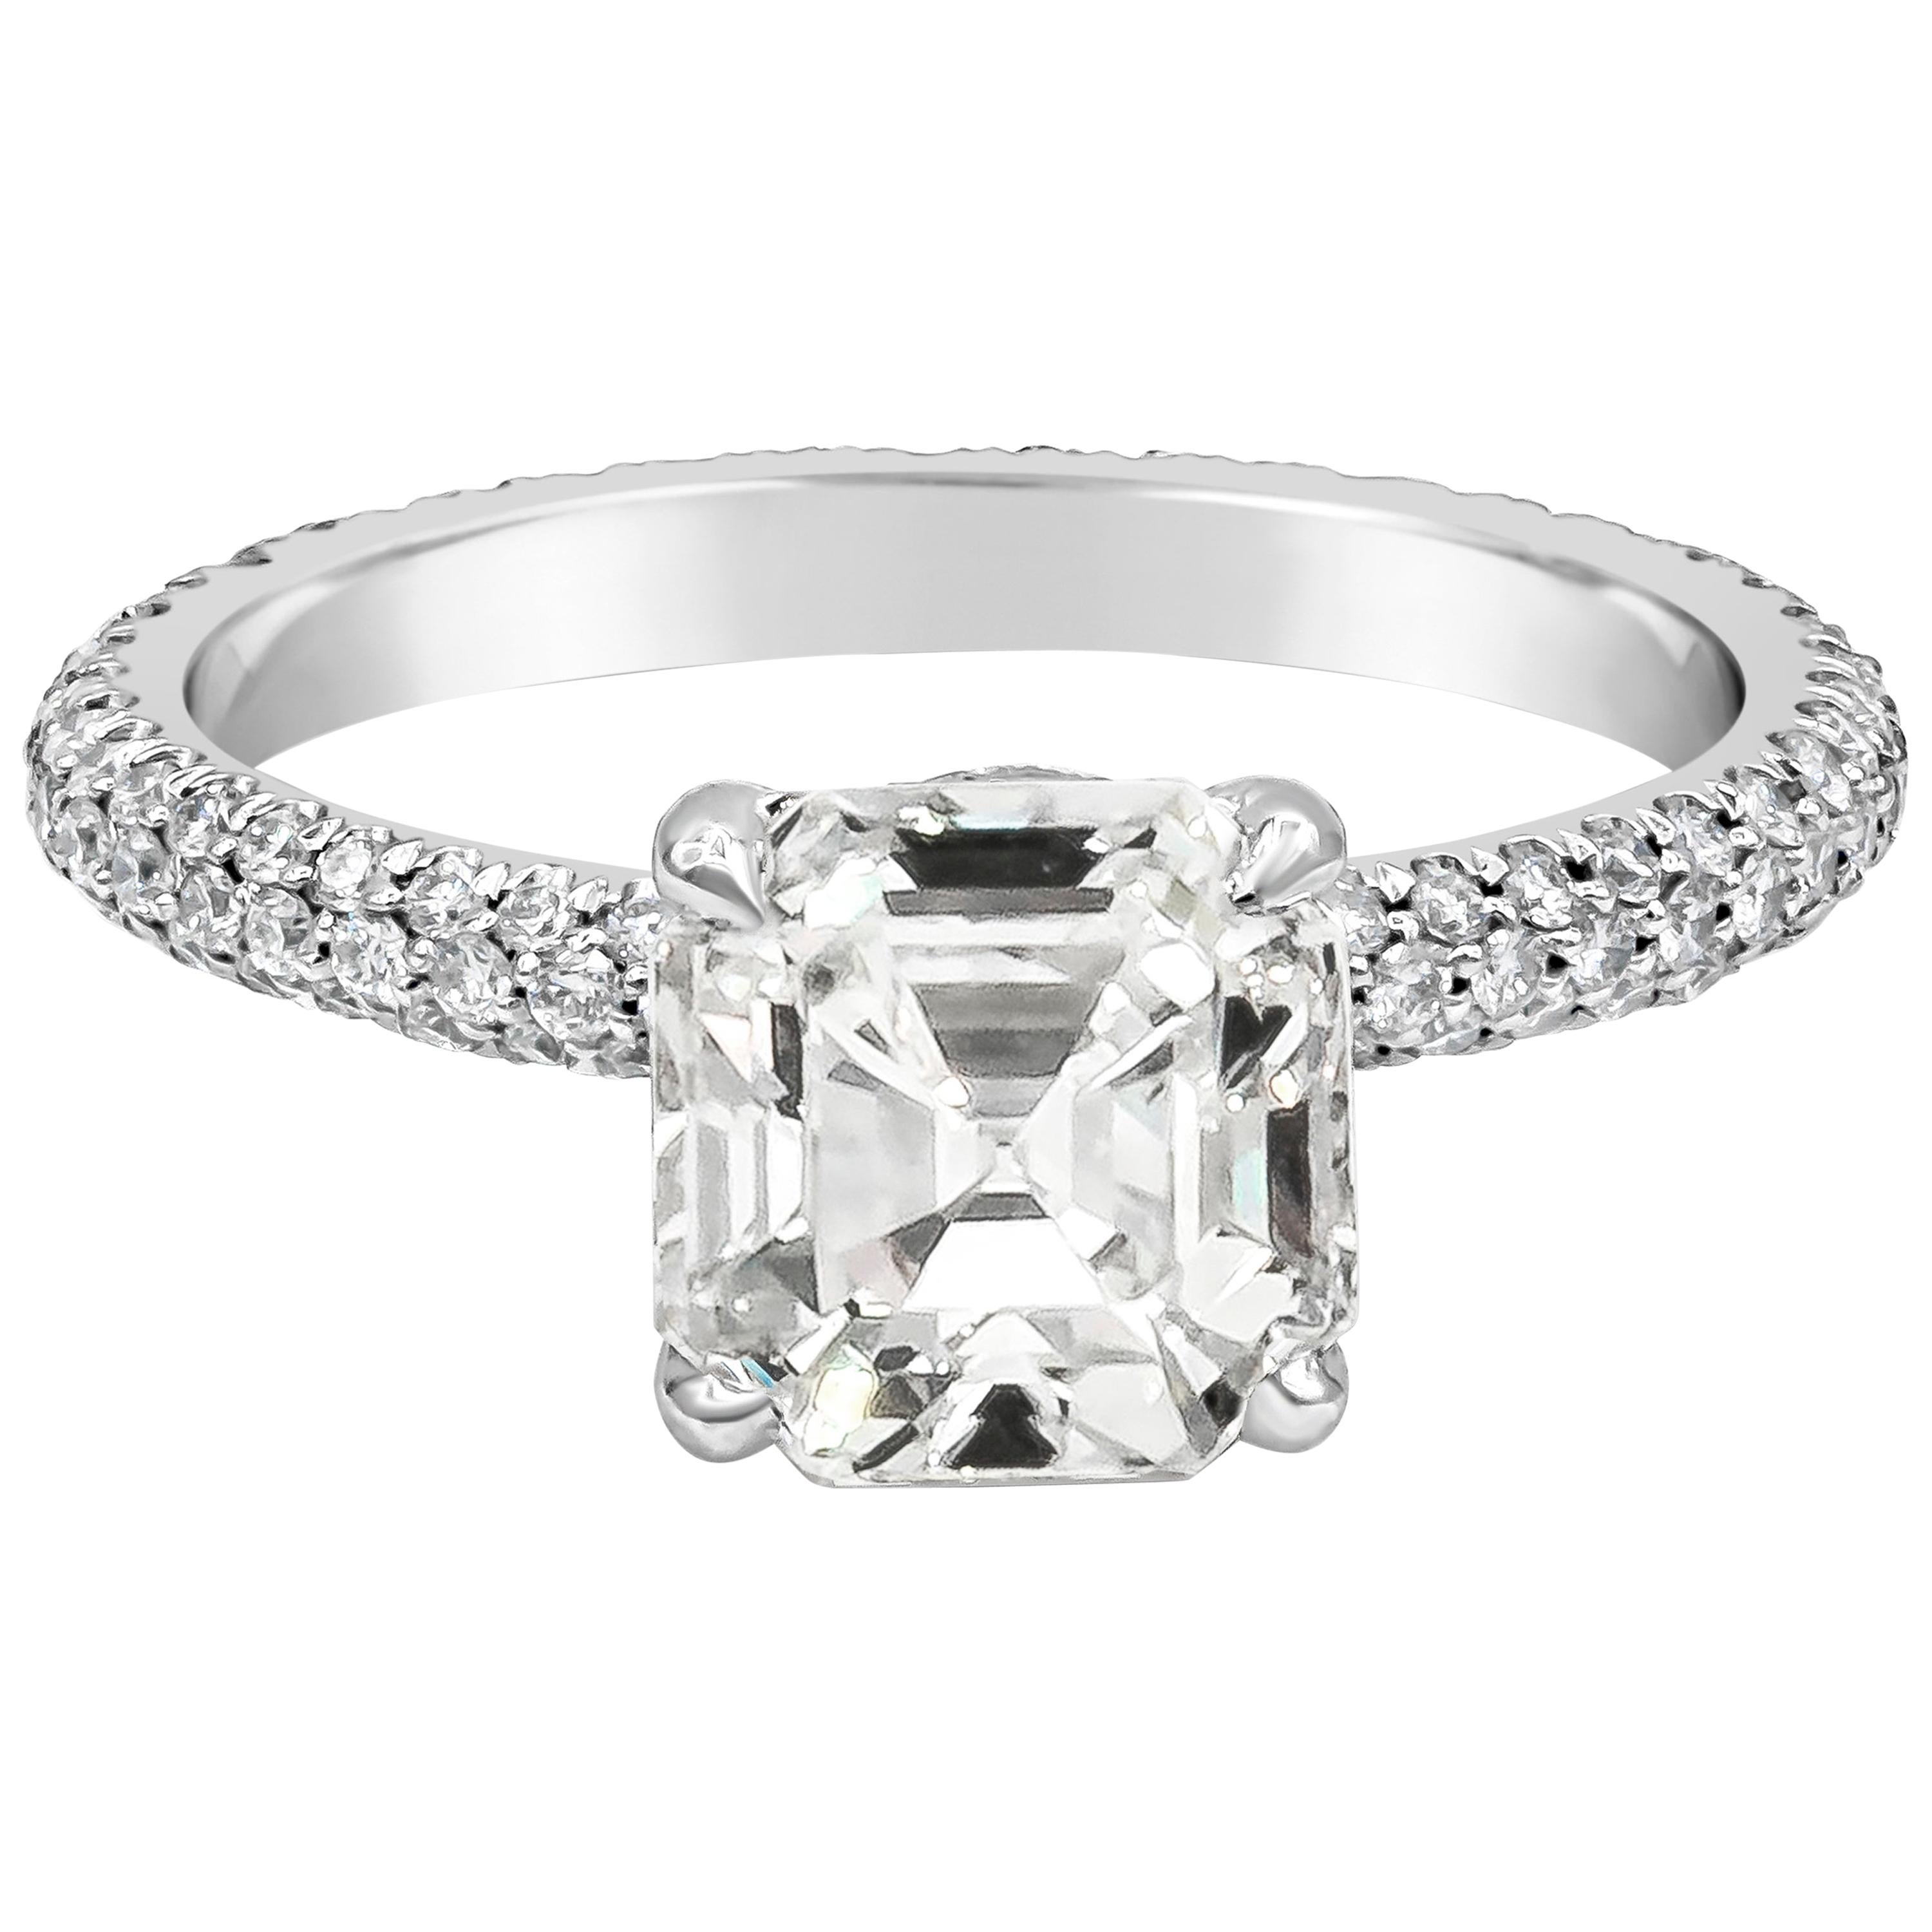 A classic engagement ring featuring a GIA Certified 2.50 carat asscher cut diamond, J Color and VS2 in Clarity. Accented with pave-set round diamonds weighing 0.62 carats total. Made with Platinum, Size 6.25 US

Style available in different price